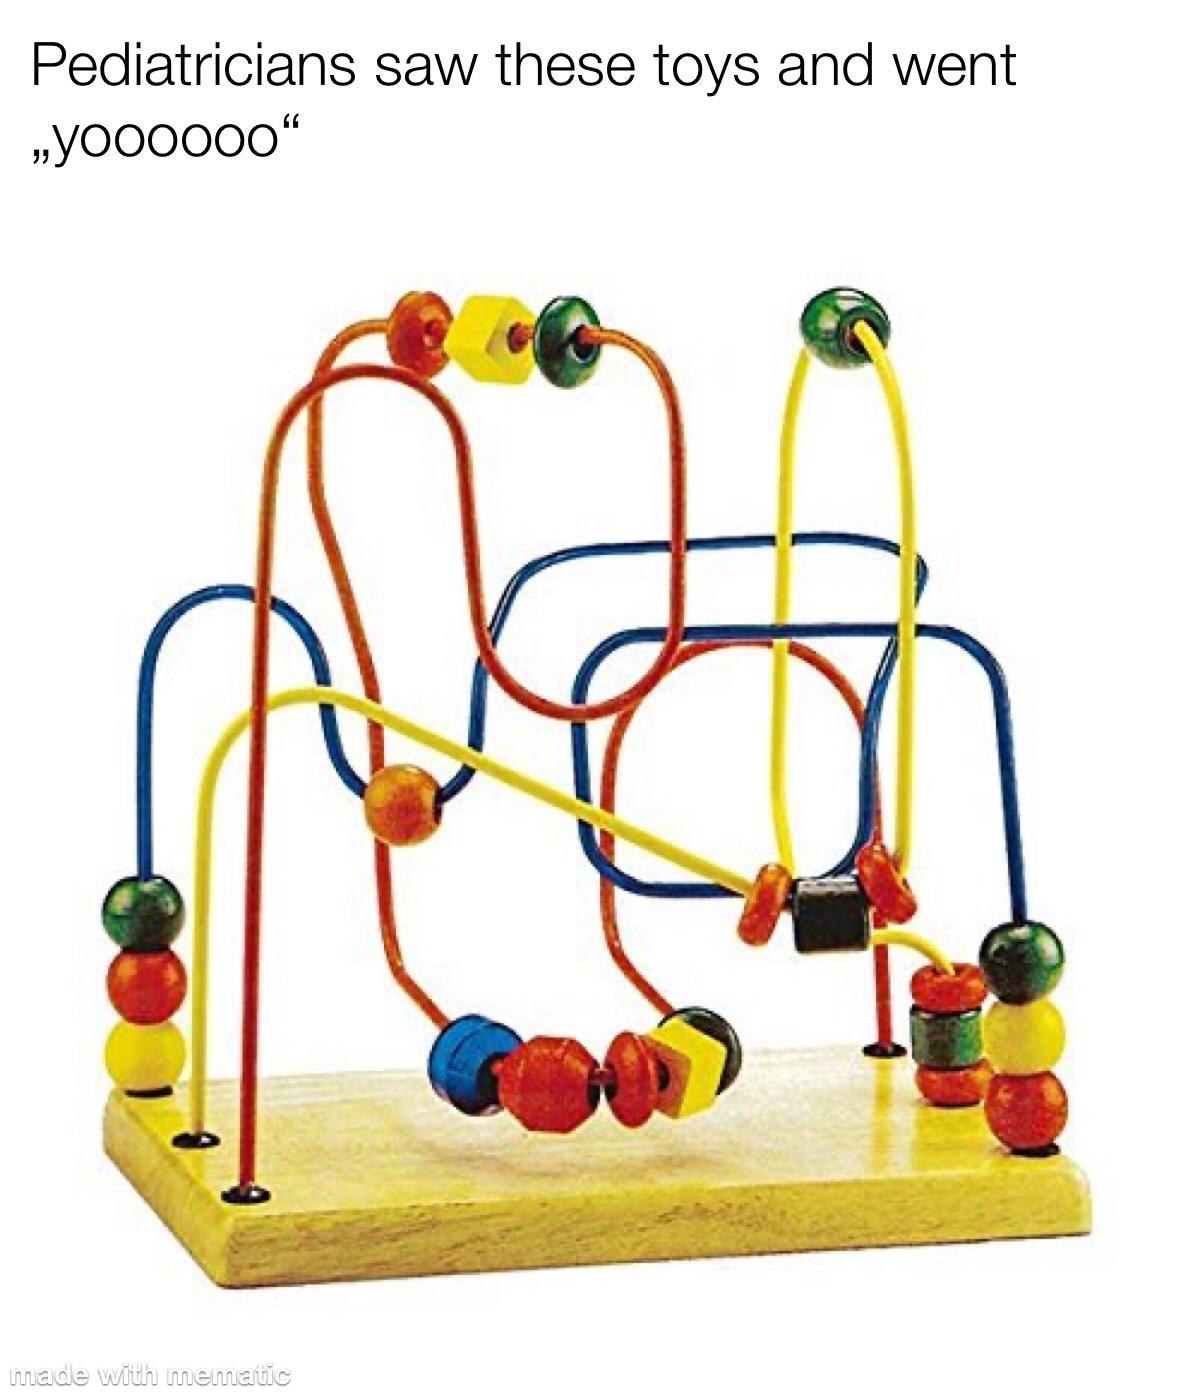 funny memes and pics - Pediatricians saw these toys and went yoooooo" made with mematic